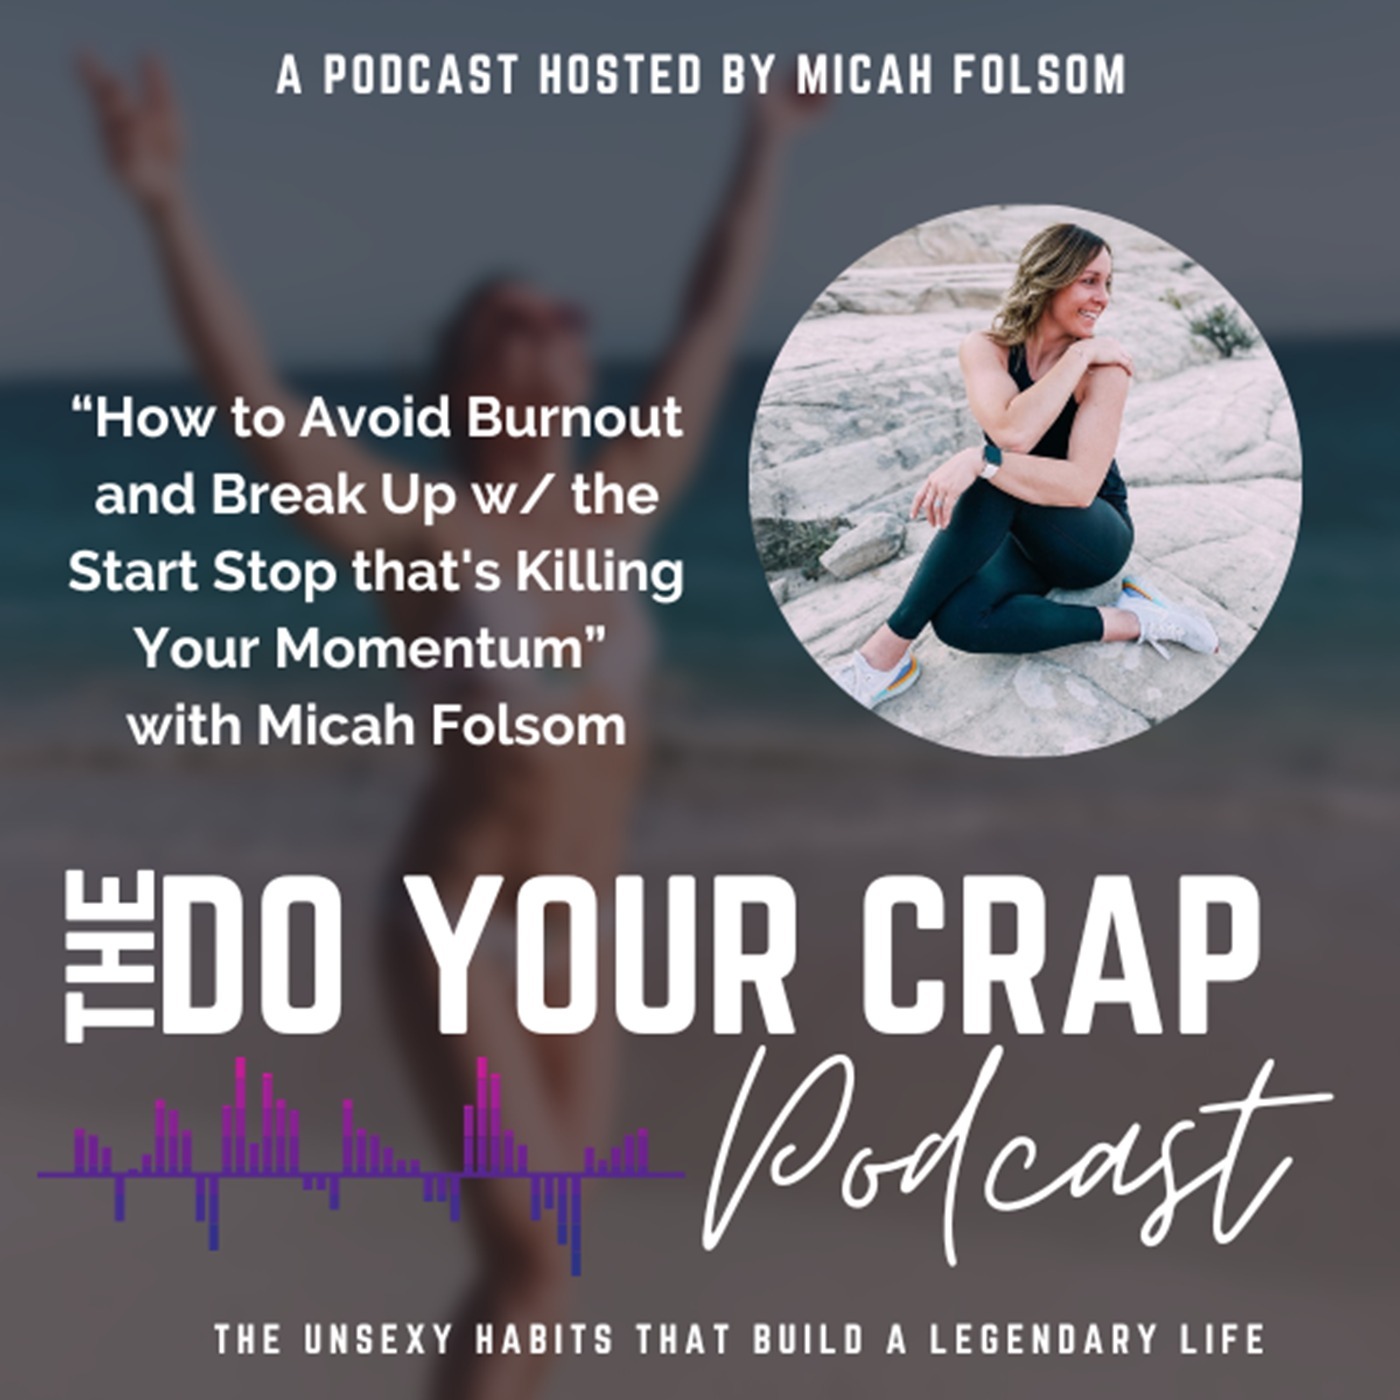 How to Avoid Burnout and Break Up w/ the Start Stop that's Killing Your Momentum with Micah Folsom